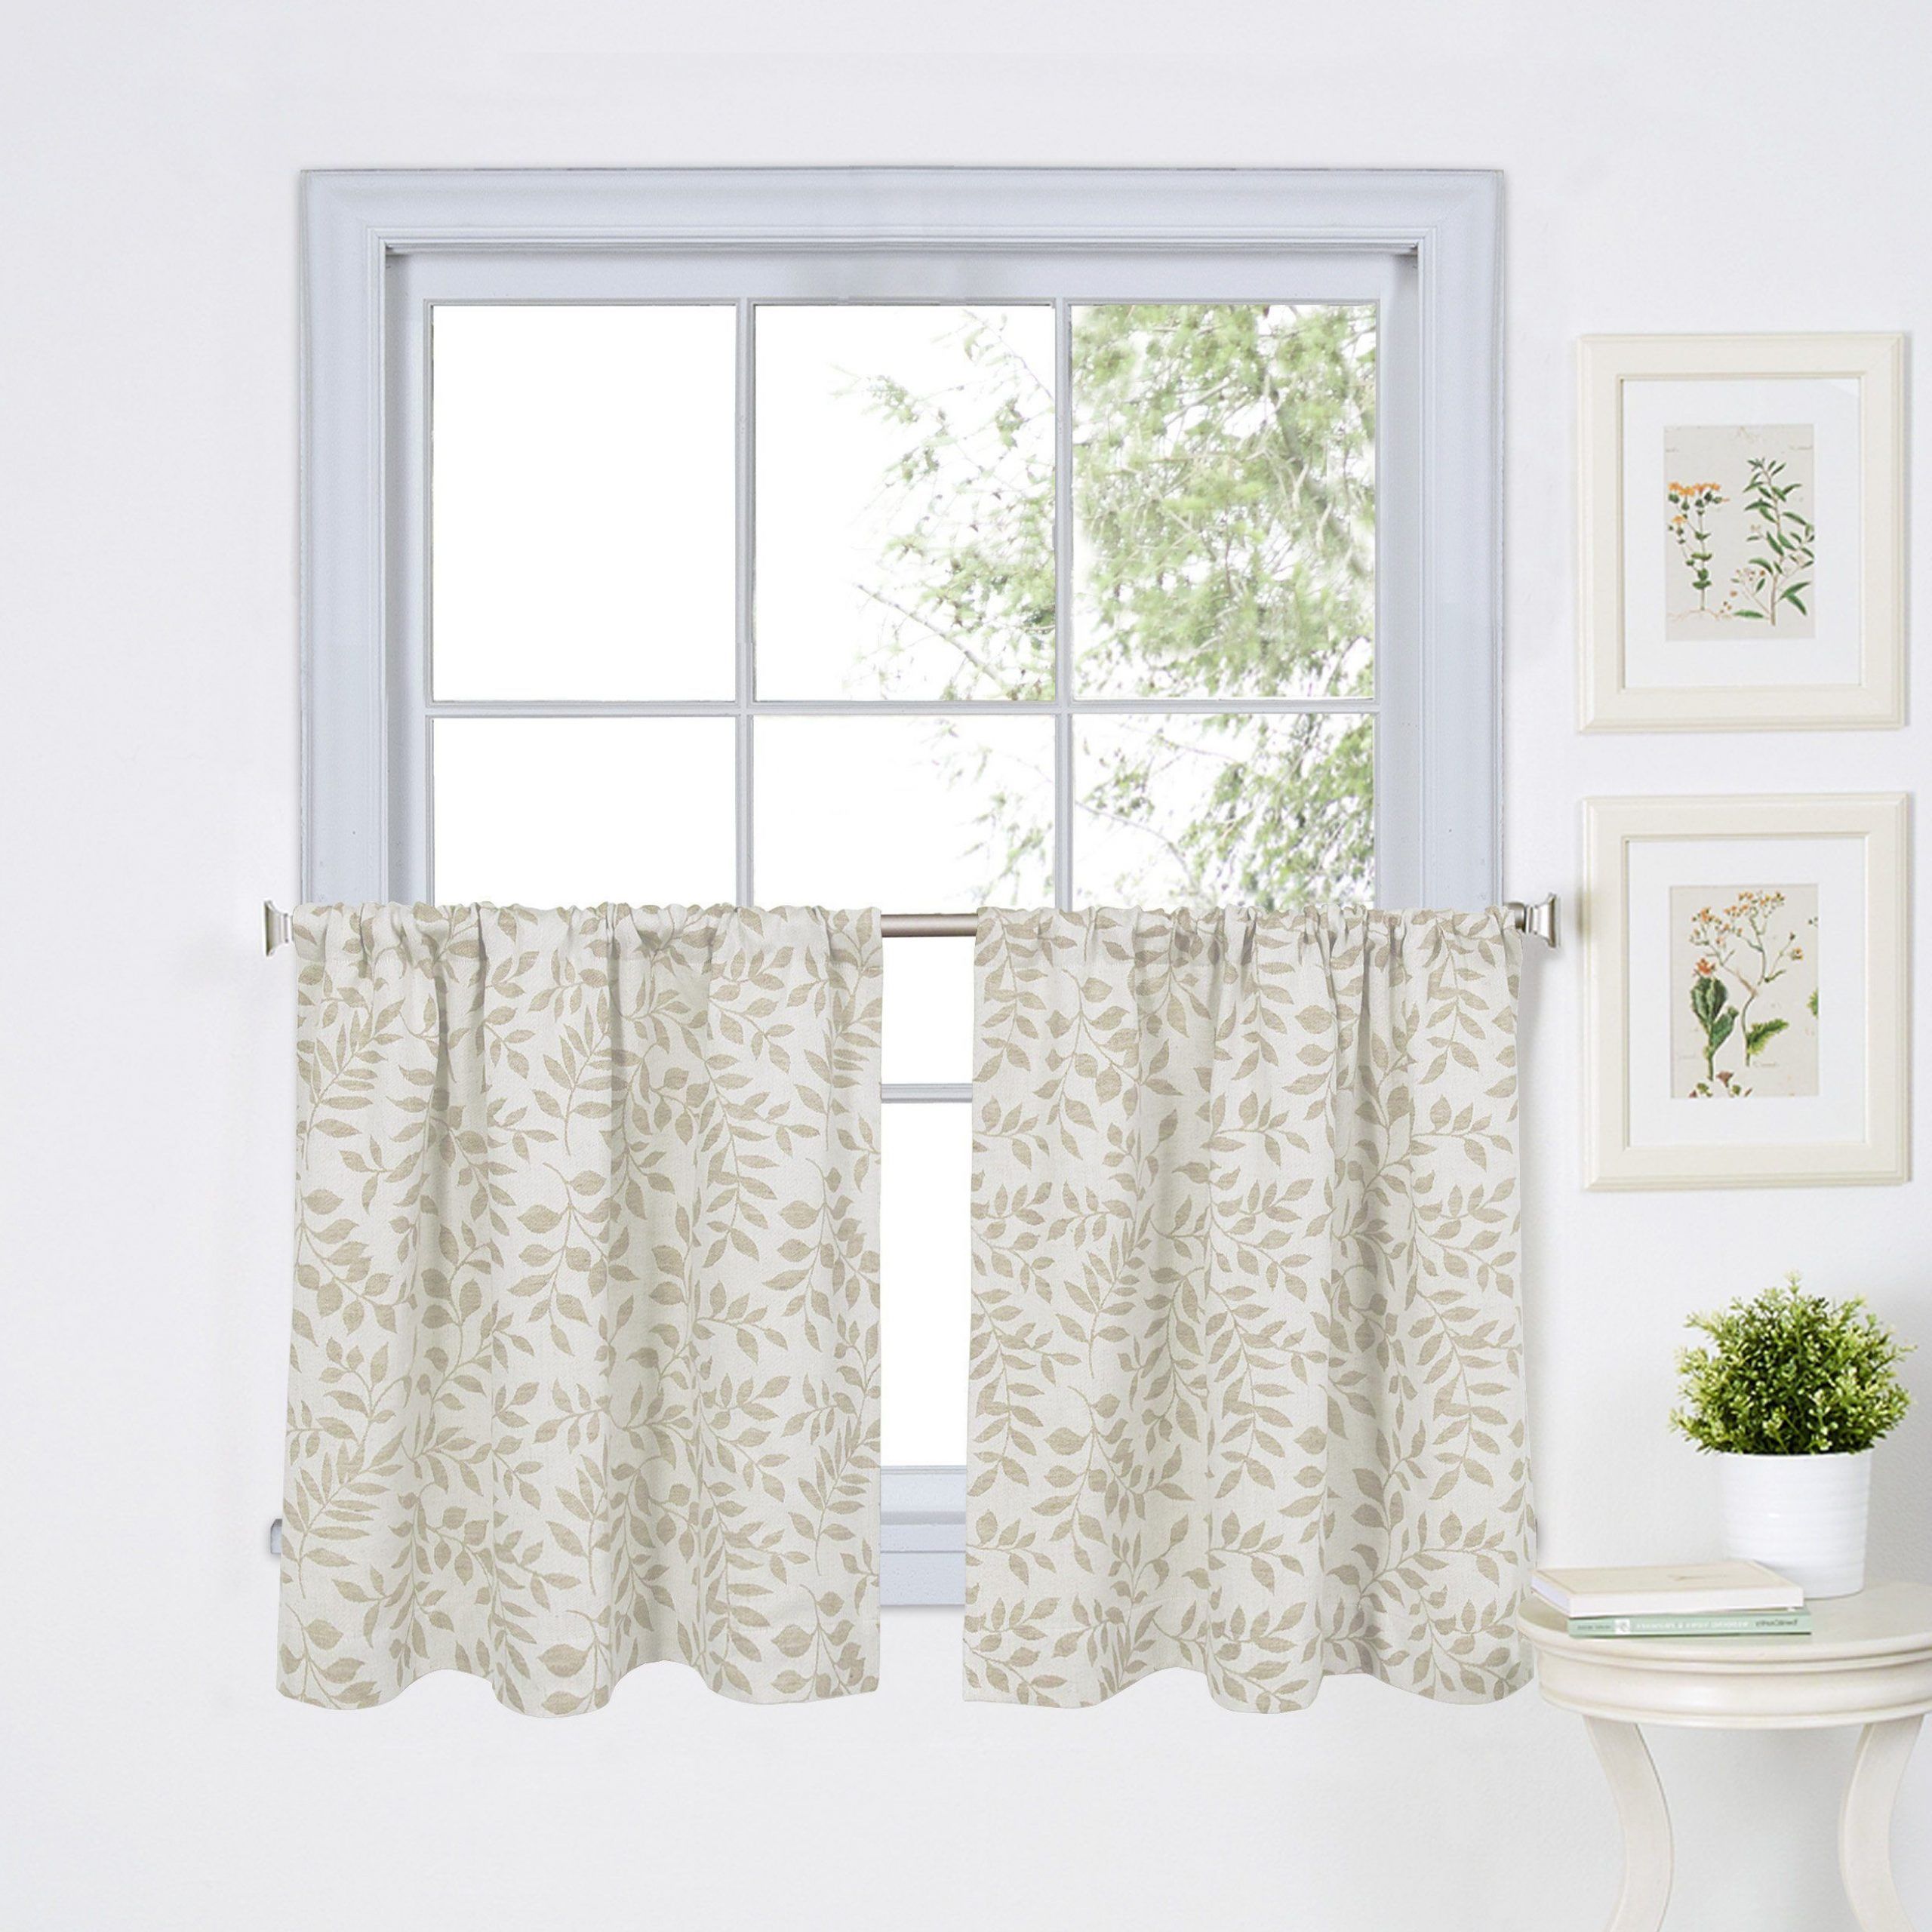 Curtain Pertaining To Navy Vertical Ruffled Waterfall Valance And Curtain Tiers (View 14 of 20)